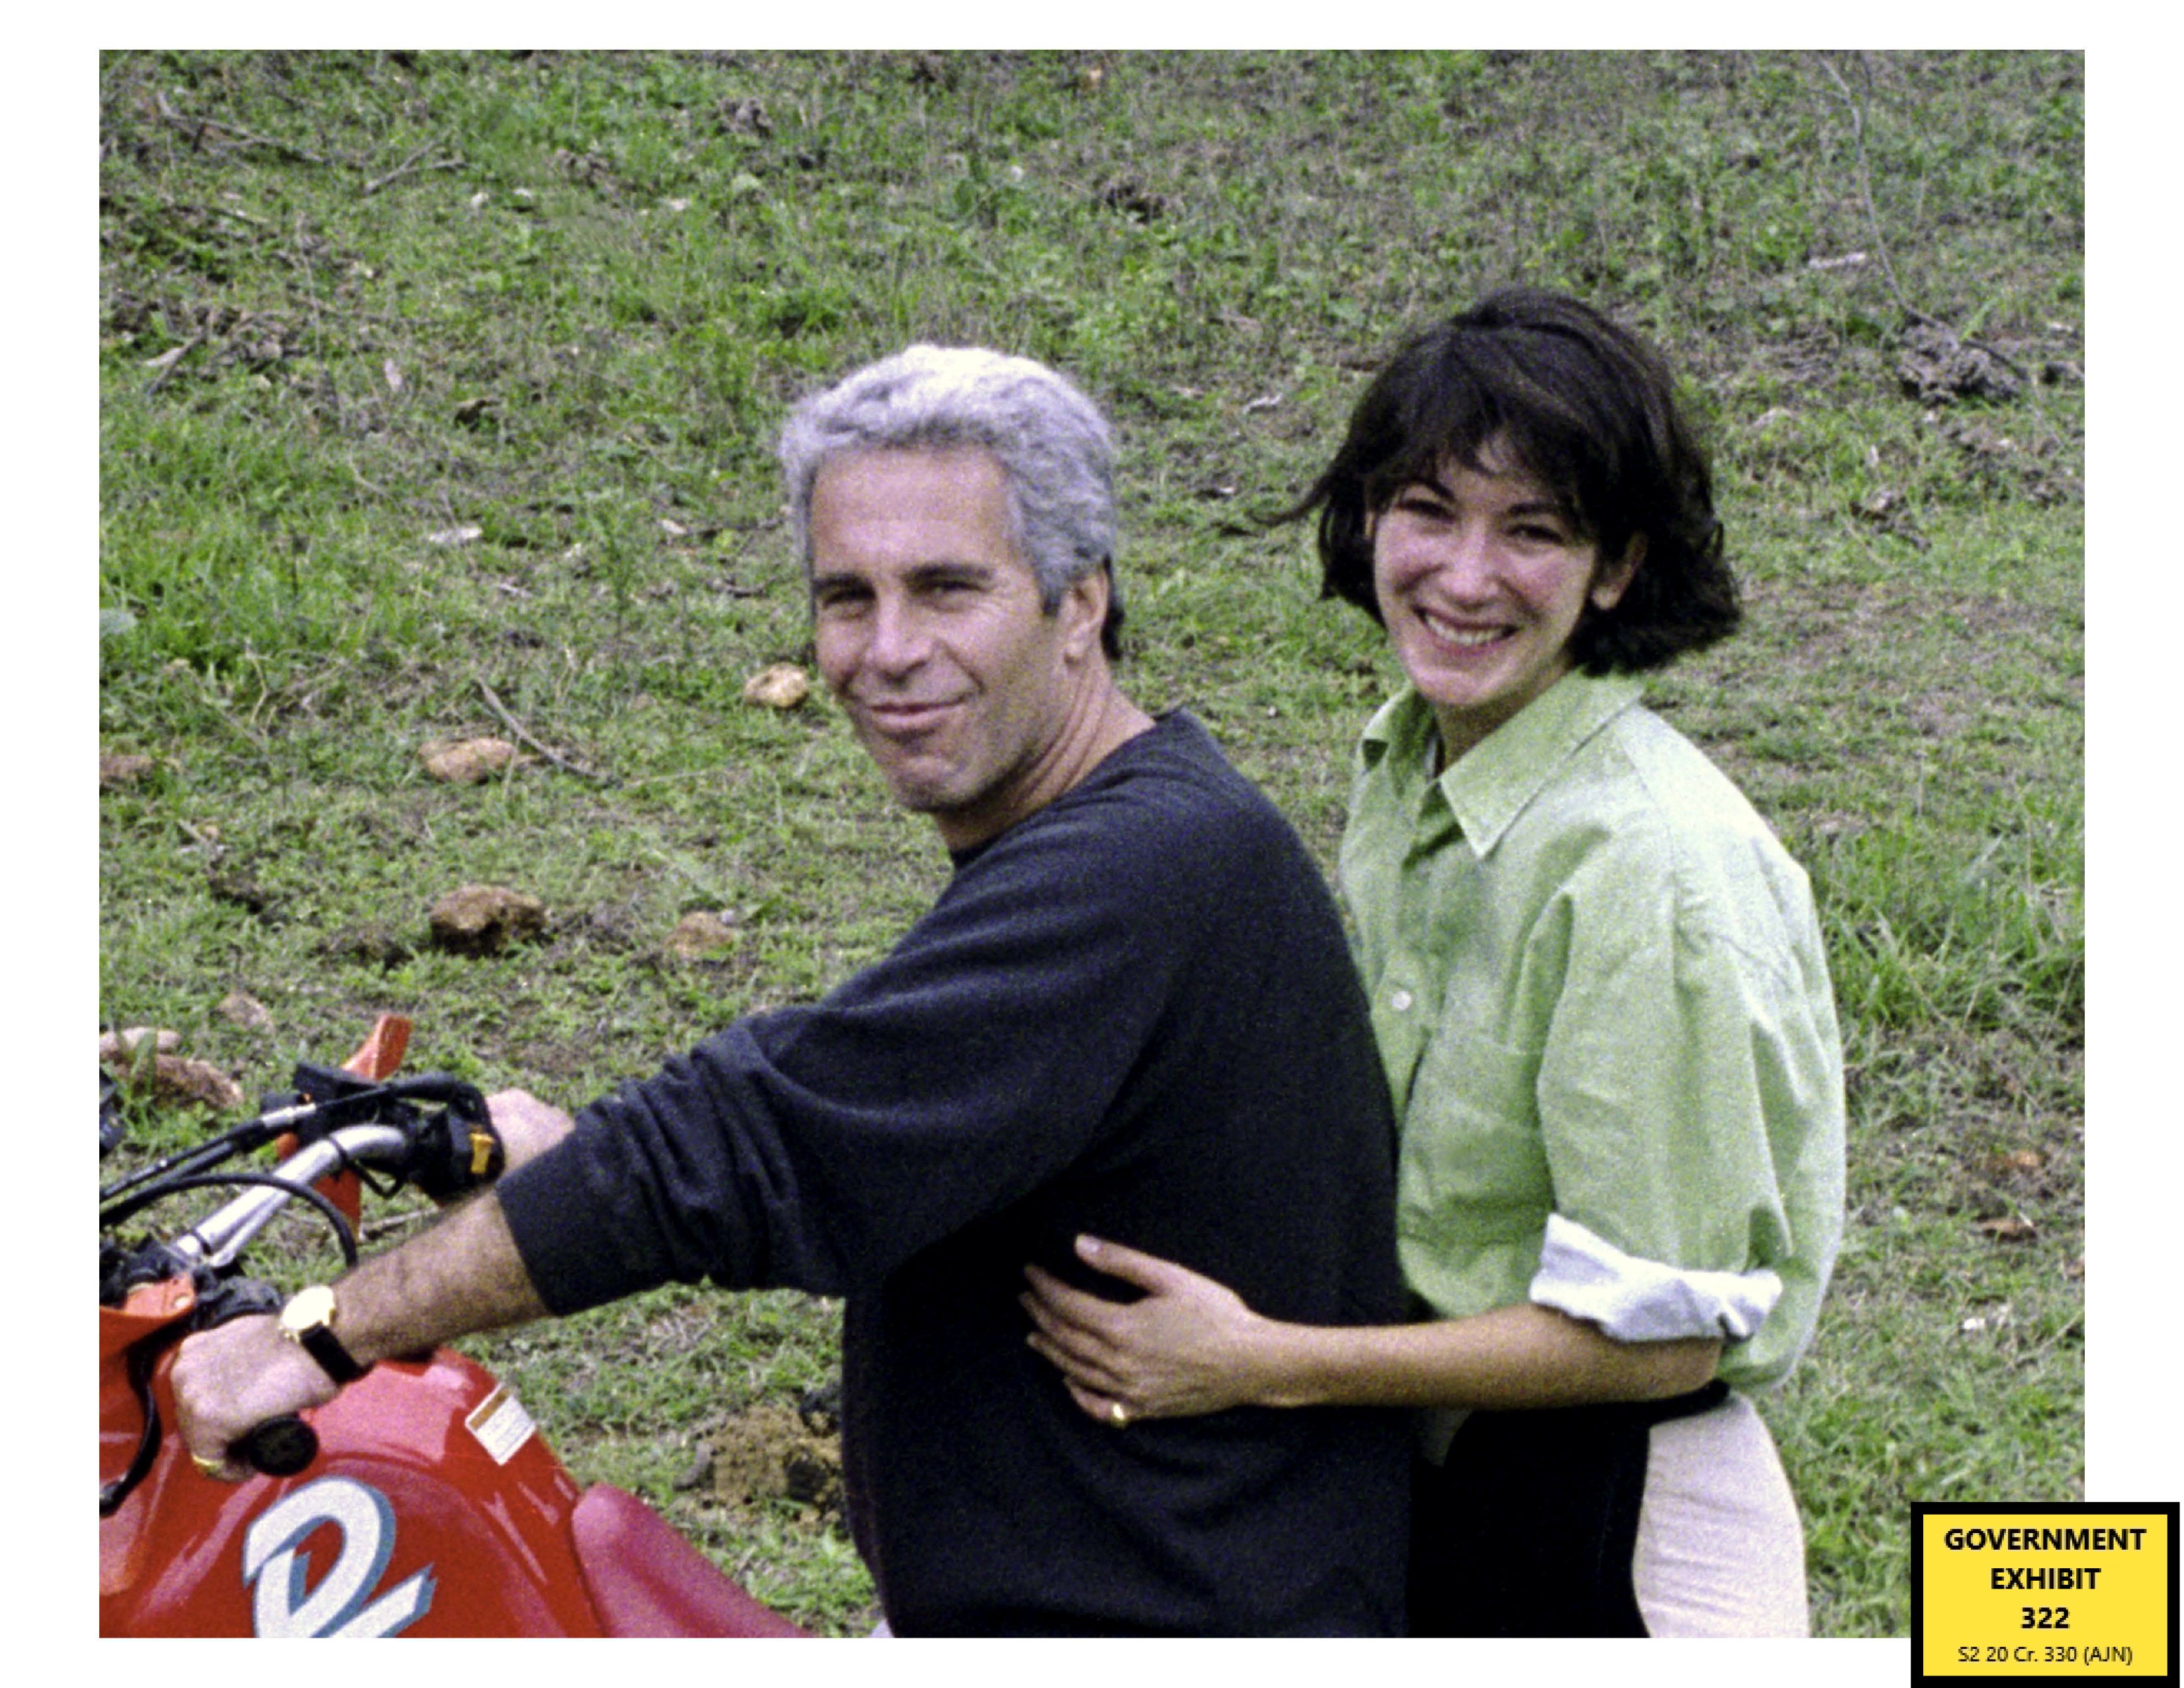 Ghislaine Maxwell was close friends with the paedophile Jeffrey Epstein